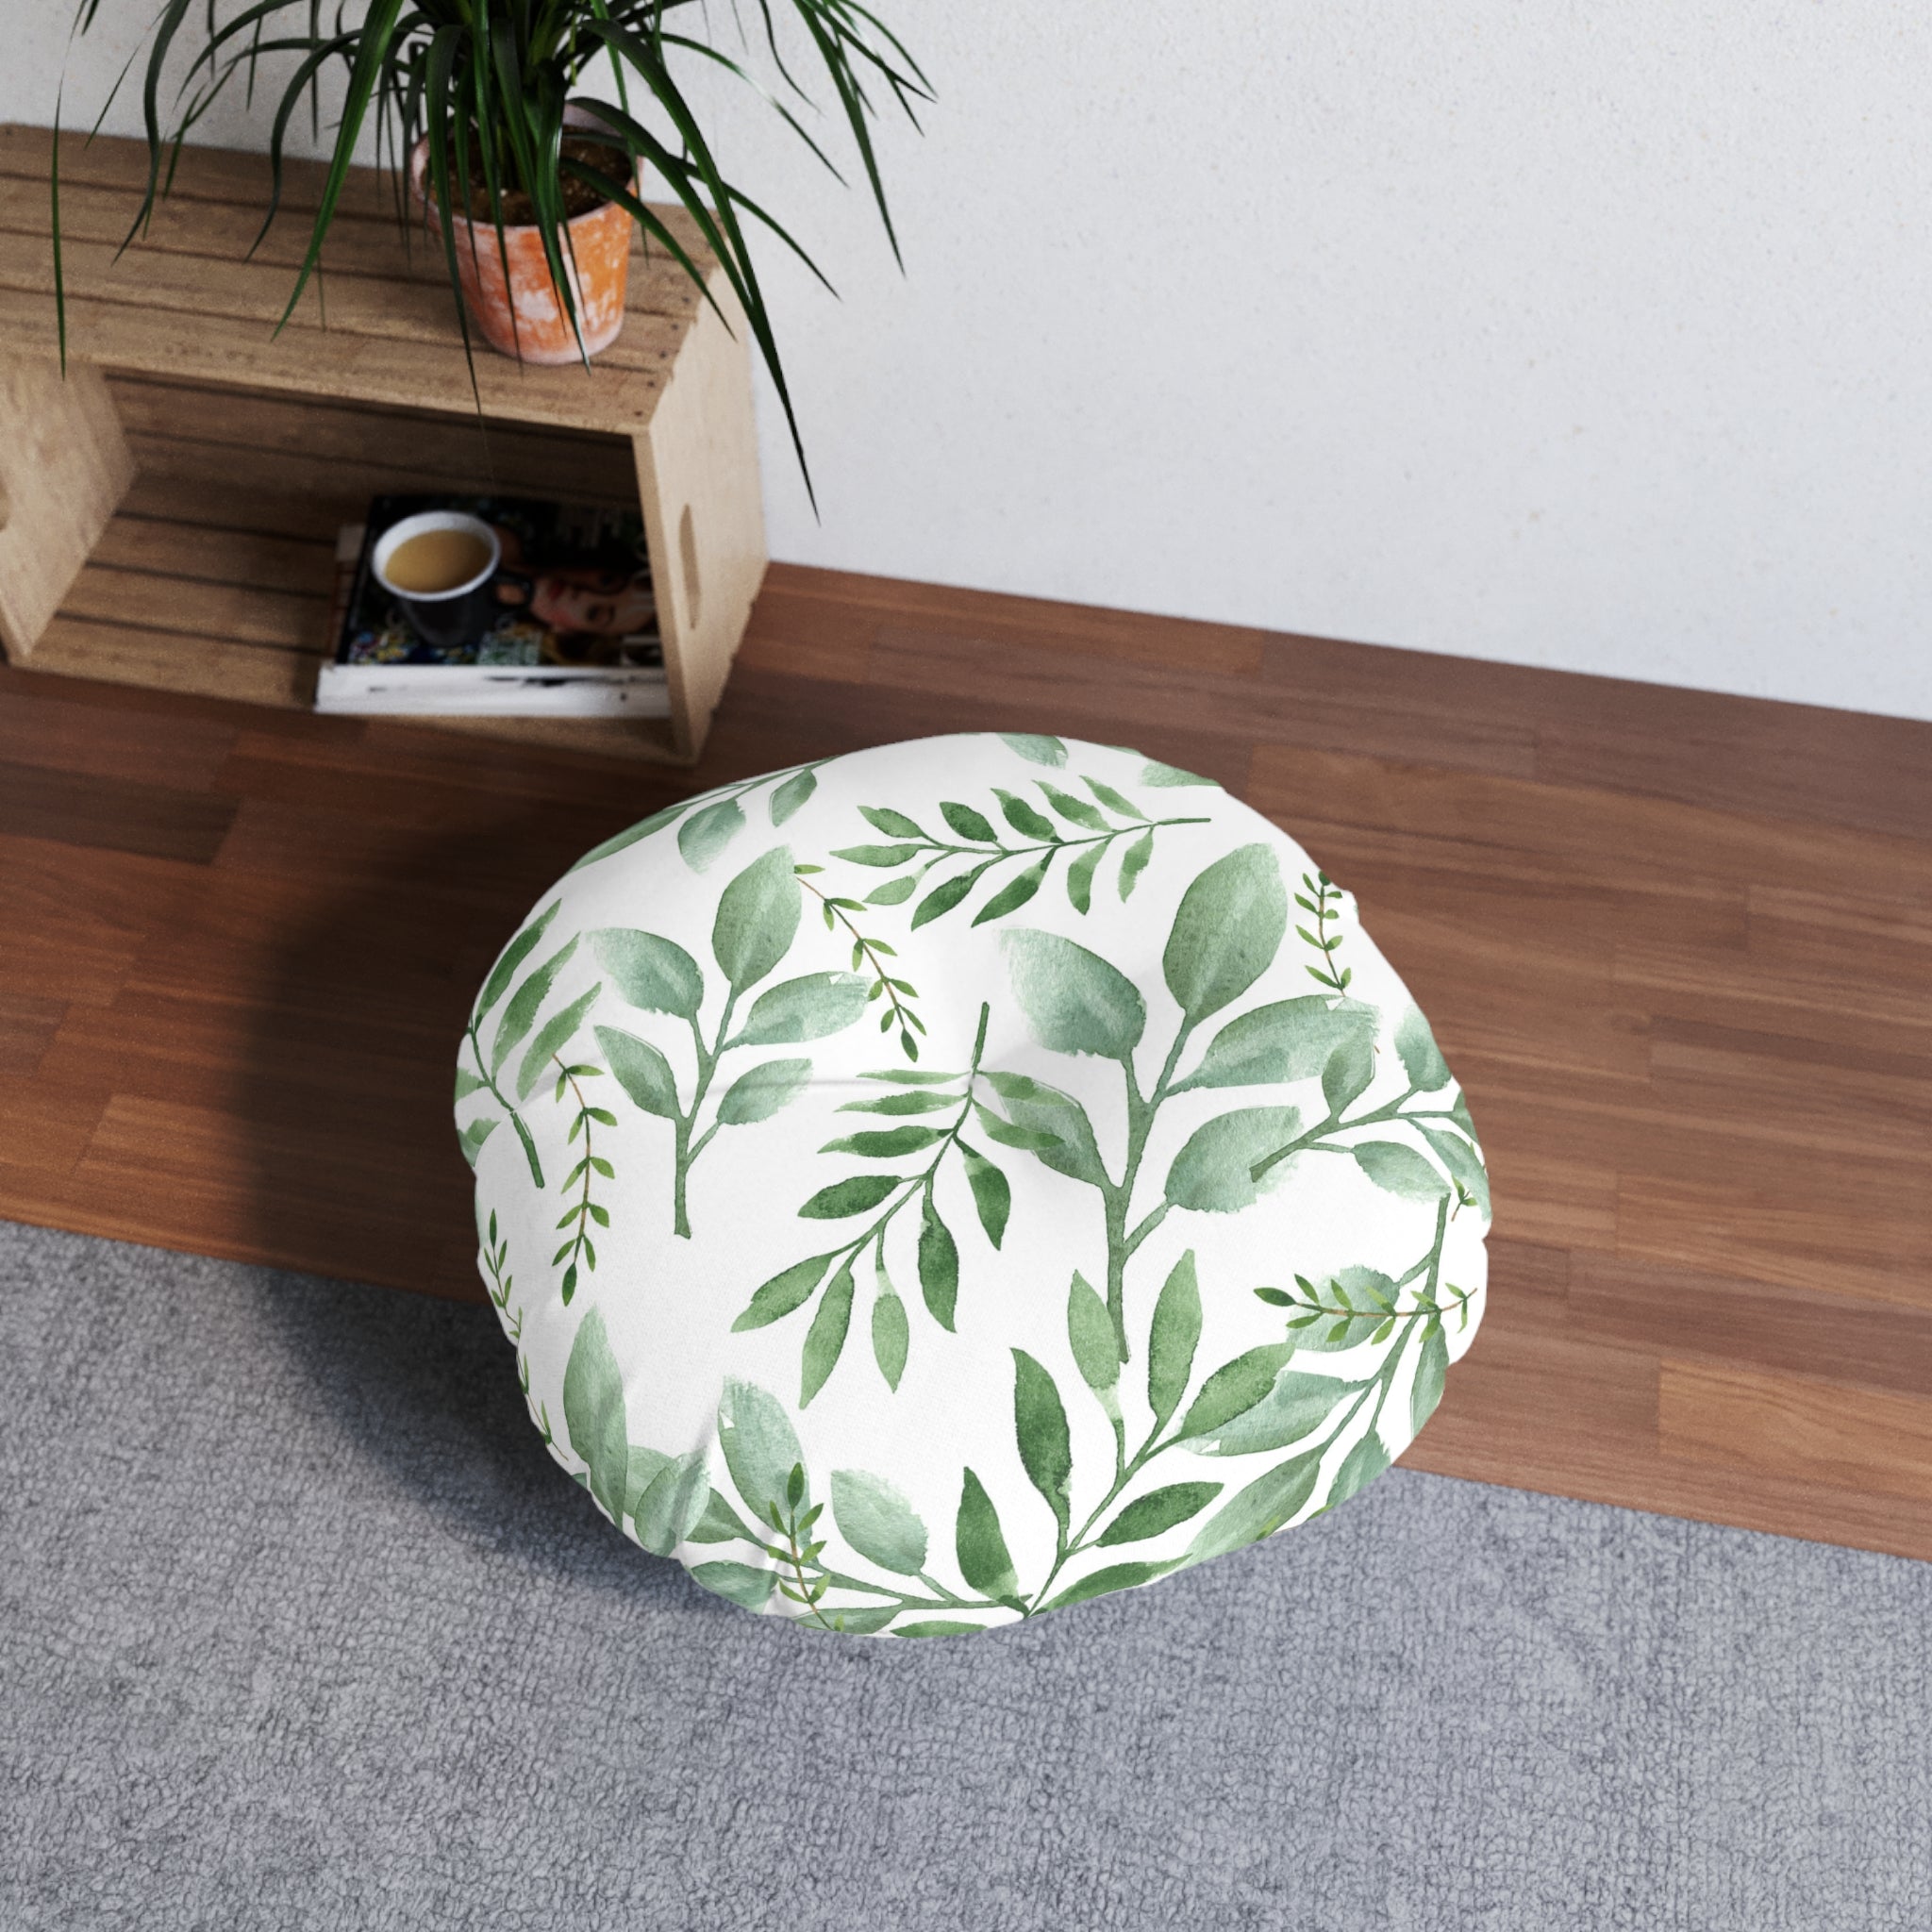 Tufted Round Floor Pillow with green leaves design laying on floor